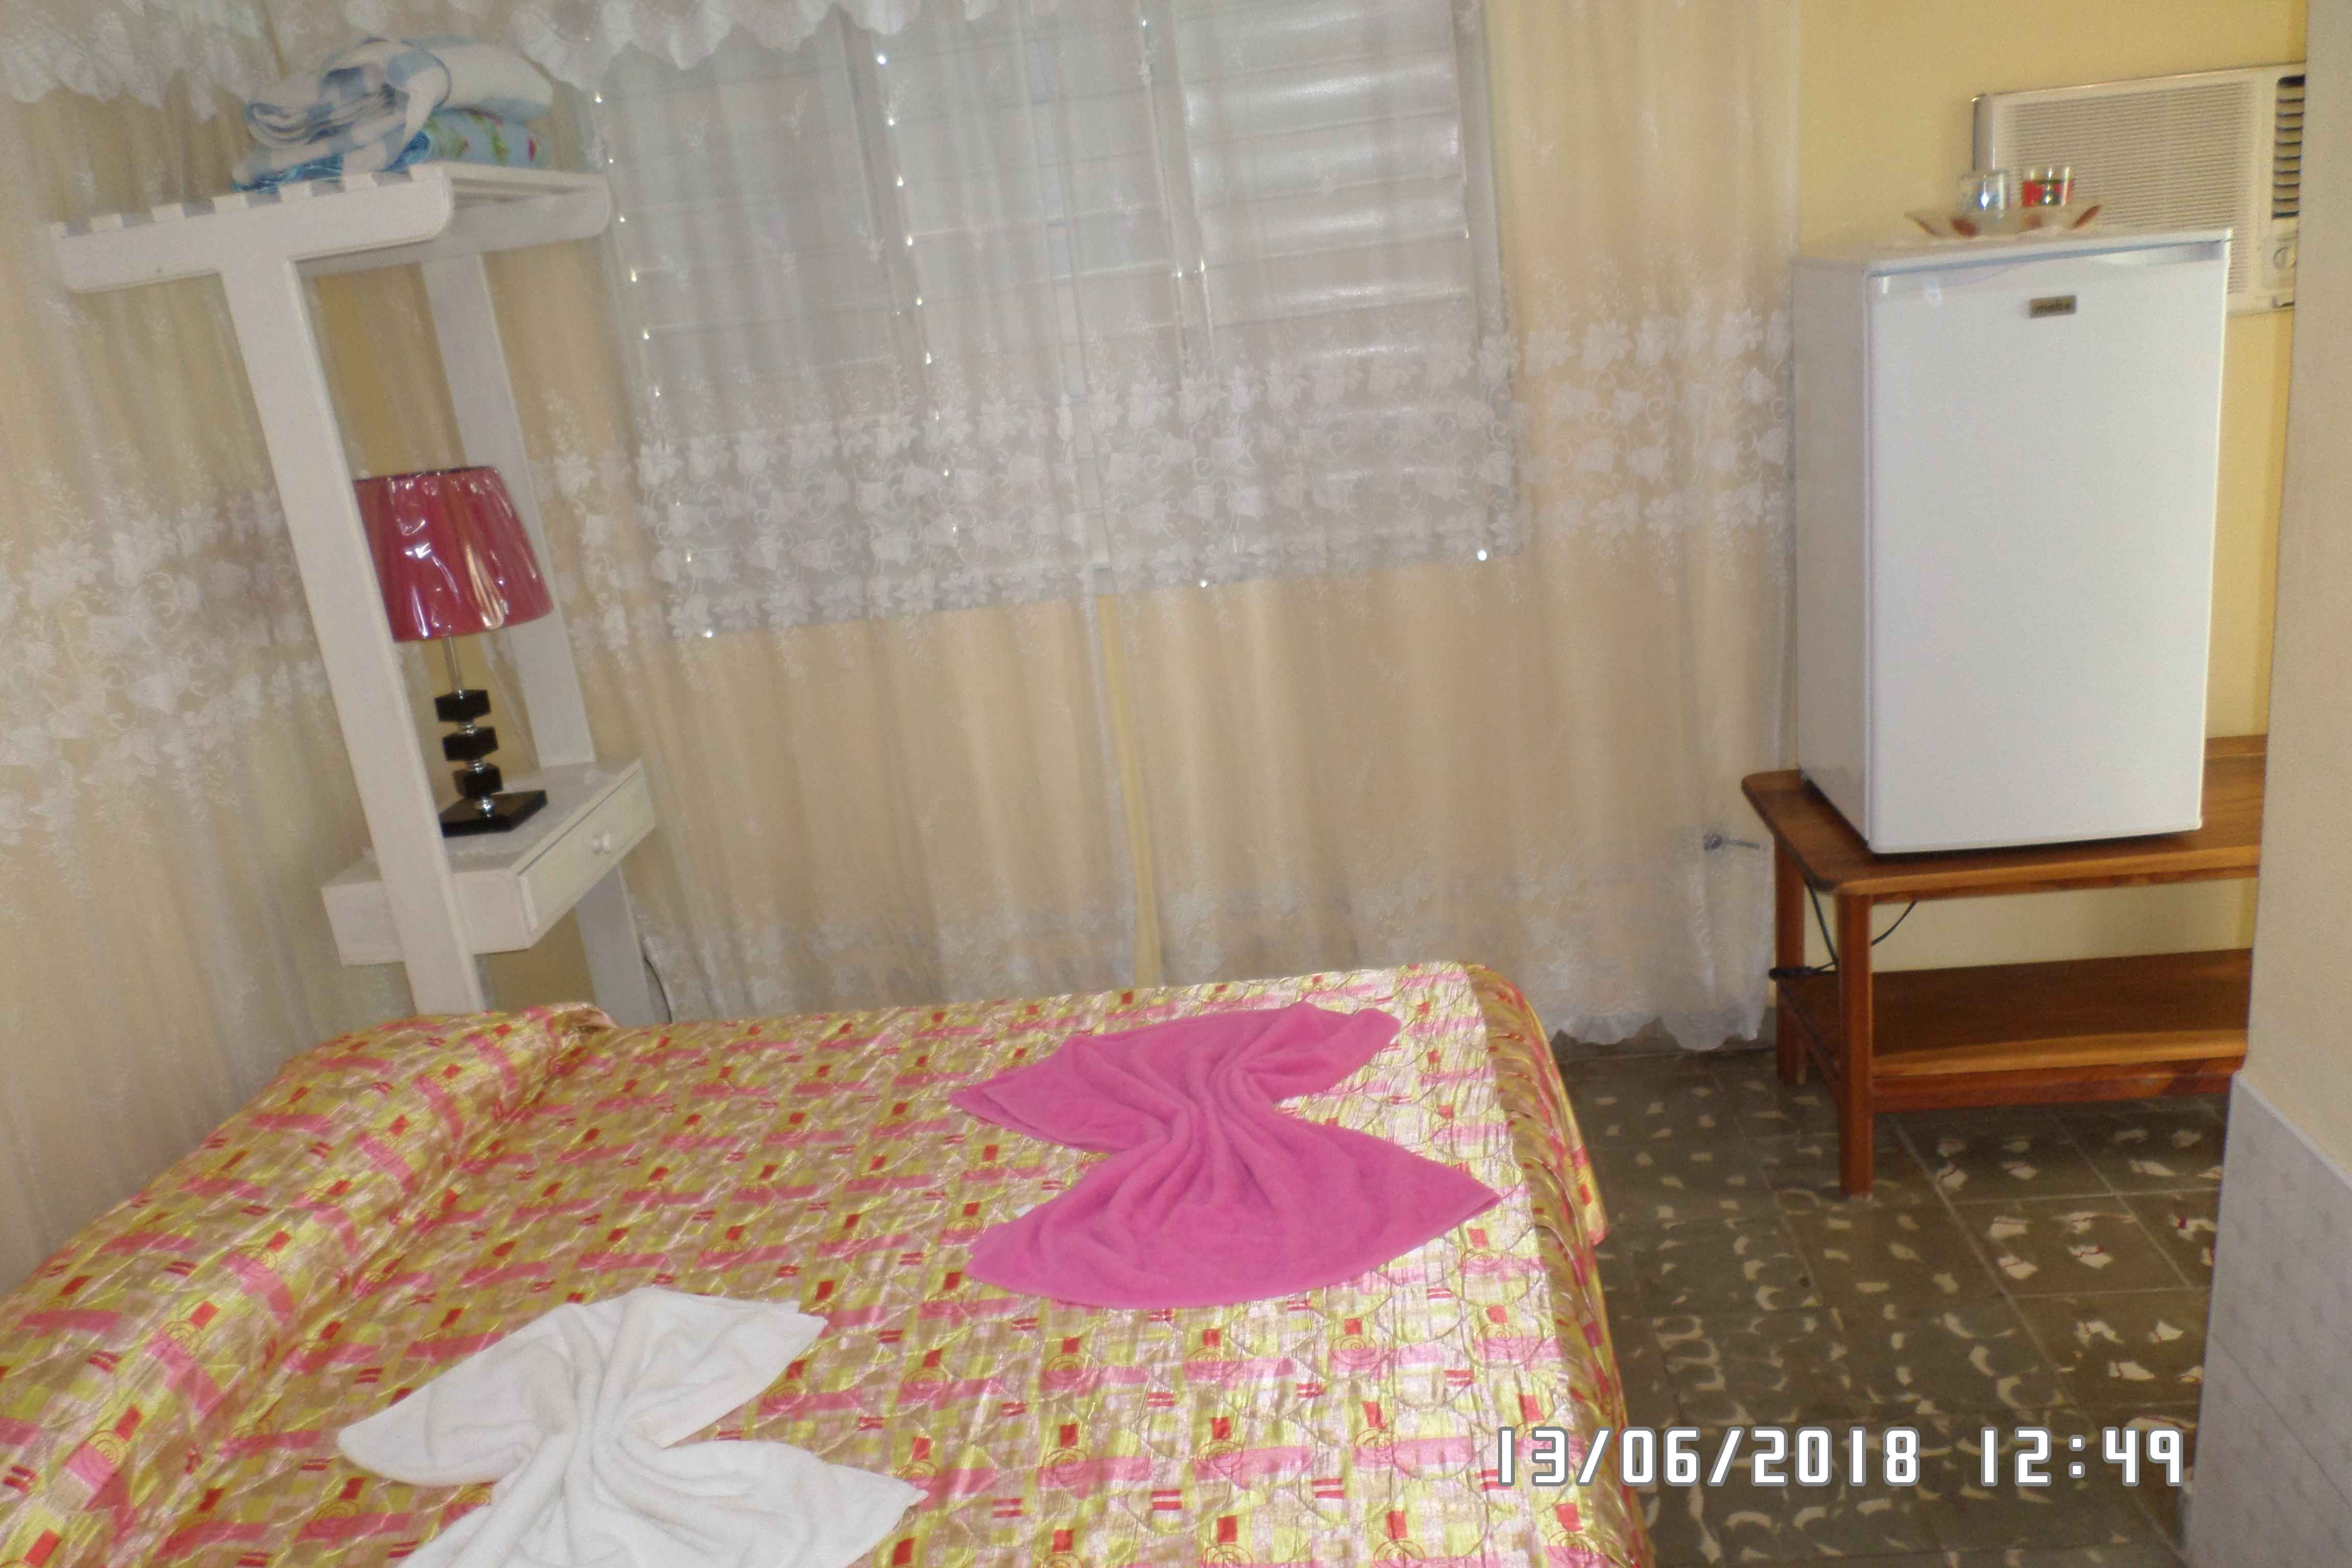 TER001 – Room 2 Triple room with private bathroom